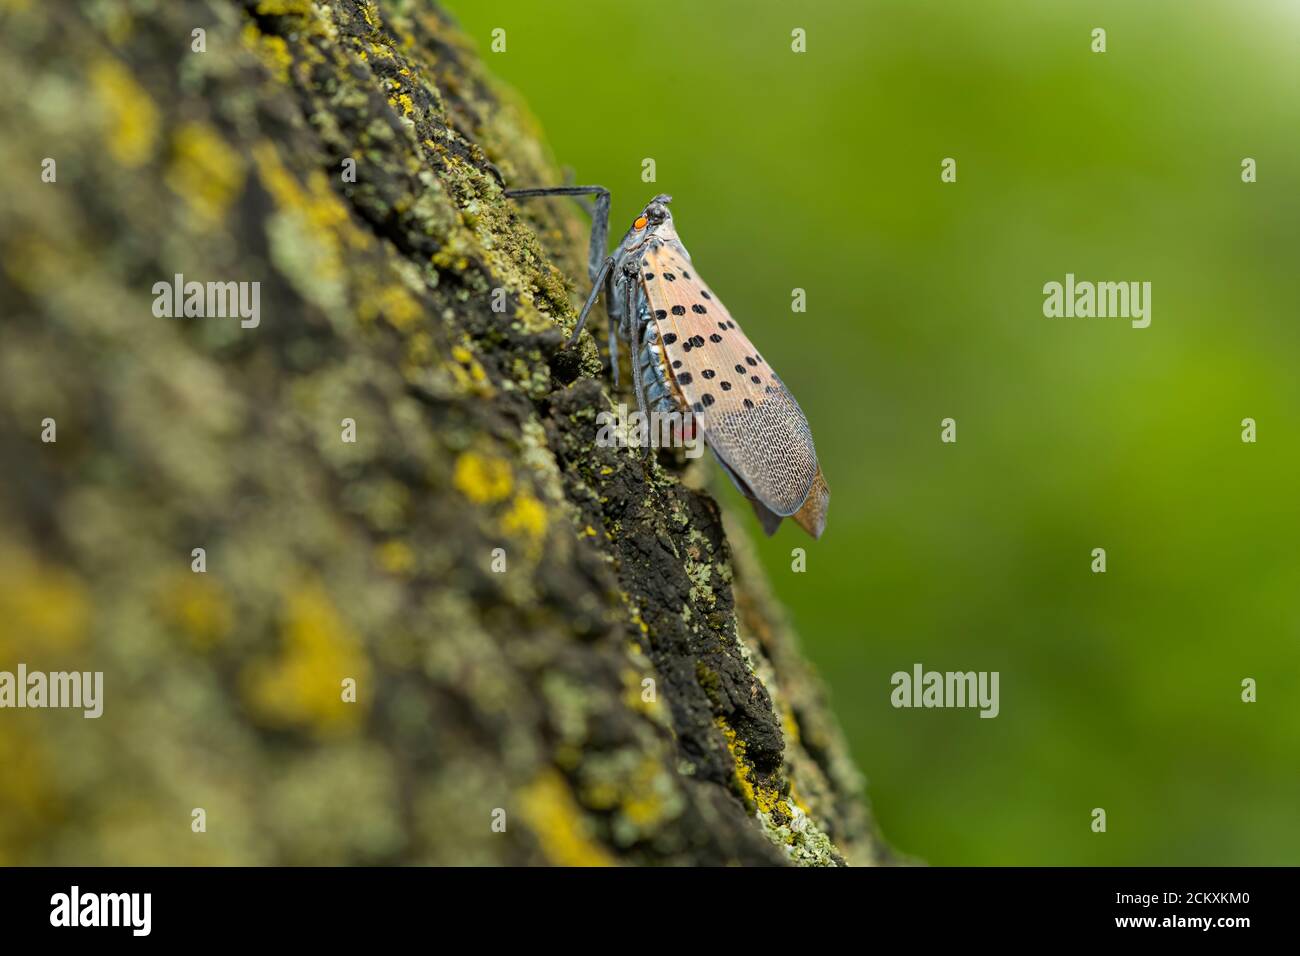 CLOSE UP OF AN ADULT SPOTTED LANTERNFLY (LYCORMA DELICATULA) ON A TREE TRUNK PENNSYLVANIA Stock Photo